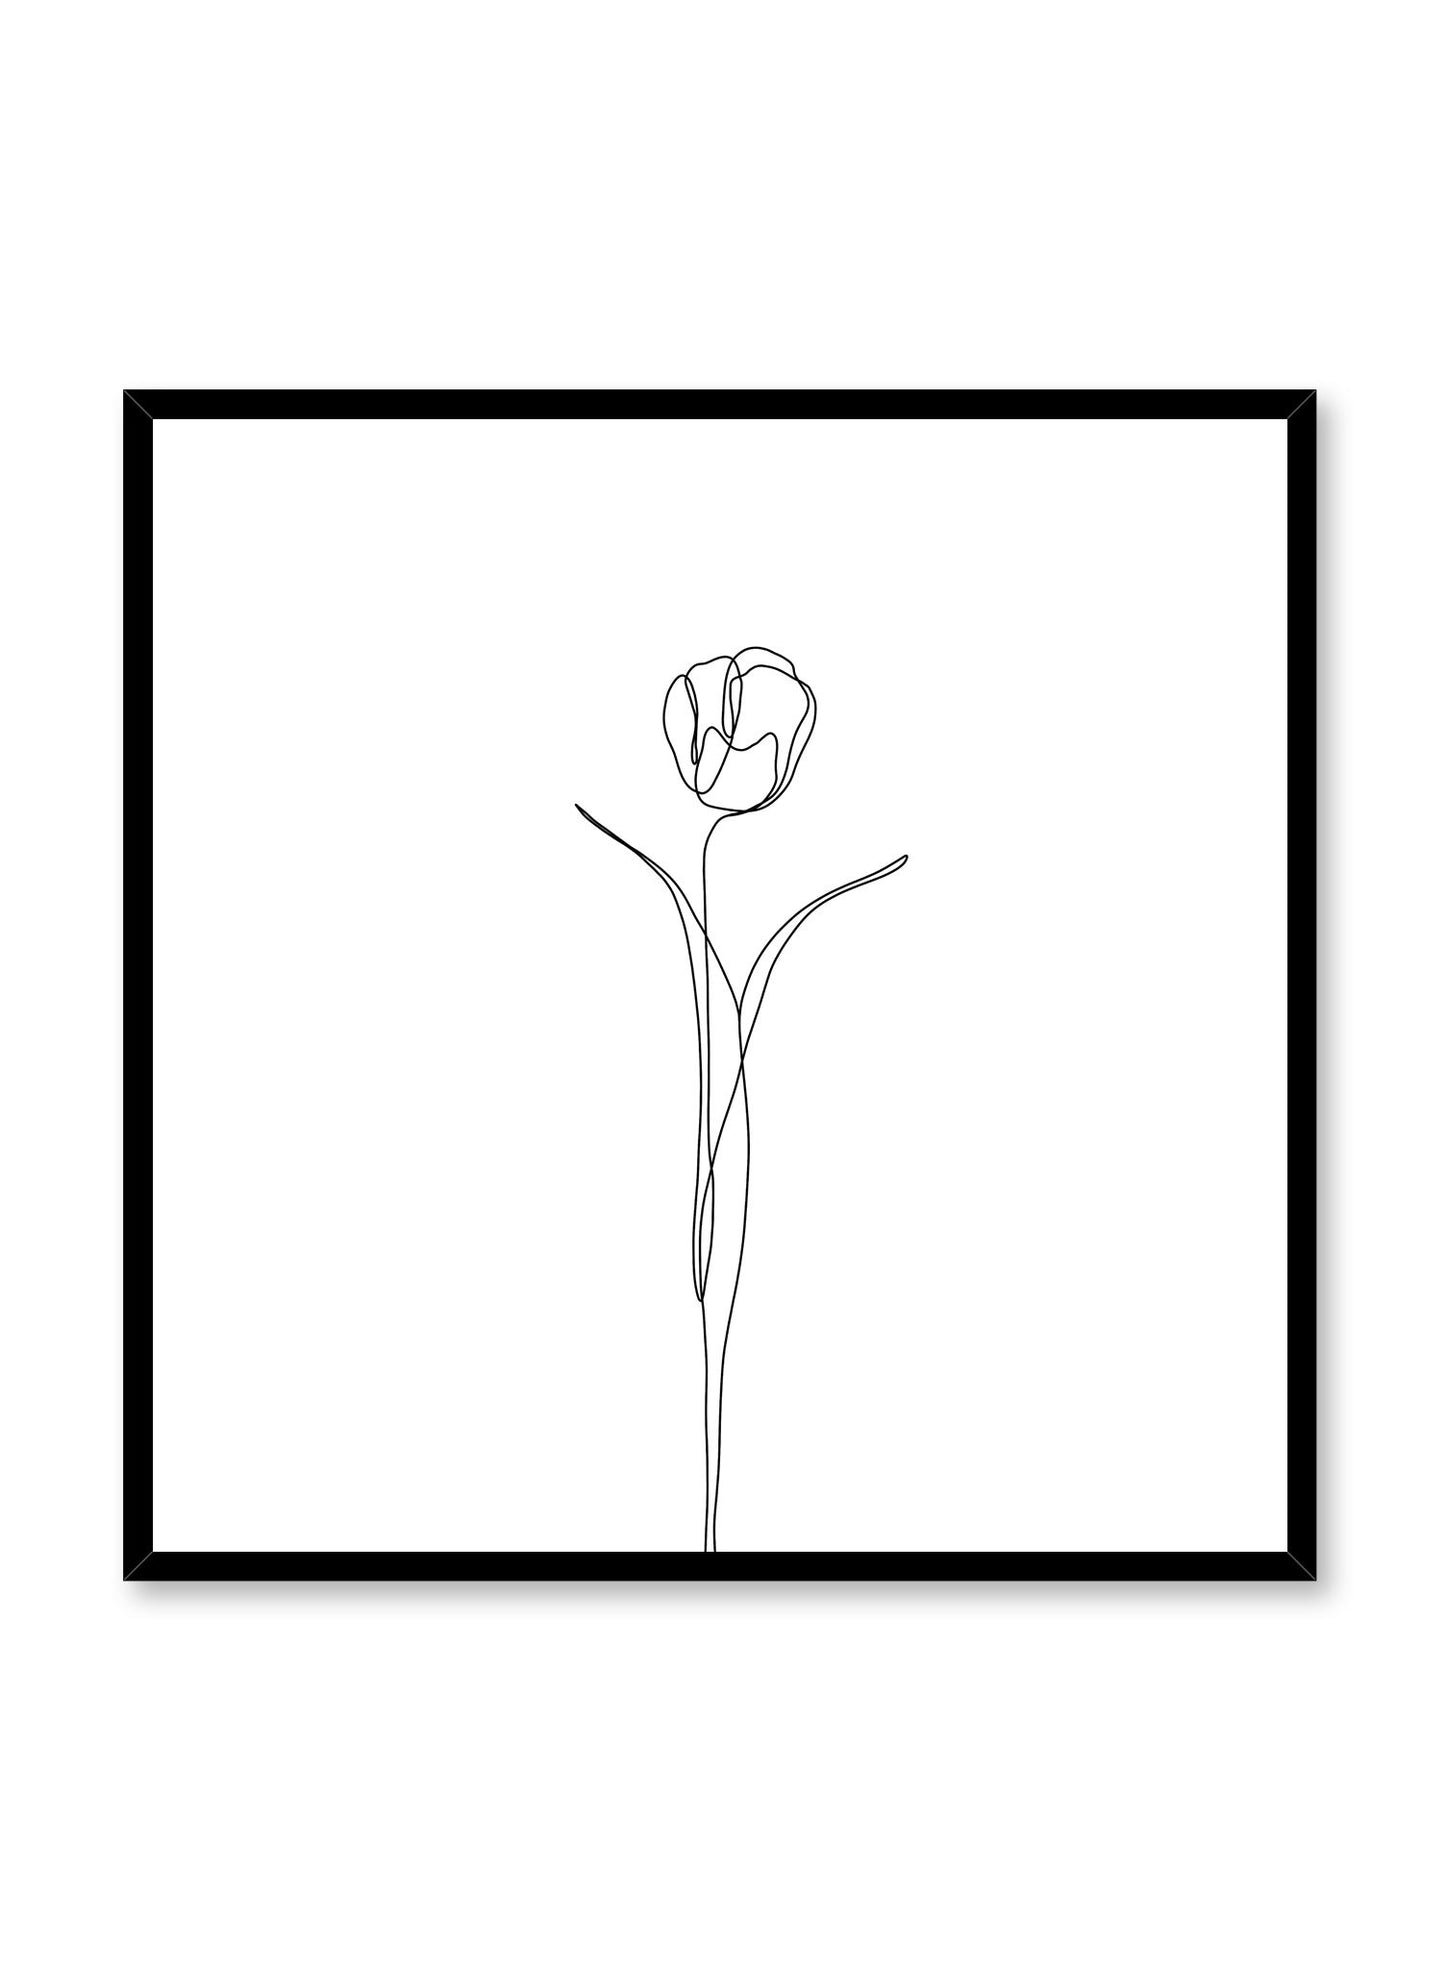 Modern minimalist poster by Opposite Wall with abstract illustration of Tulip in square format